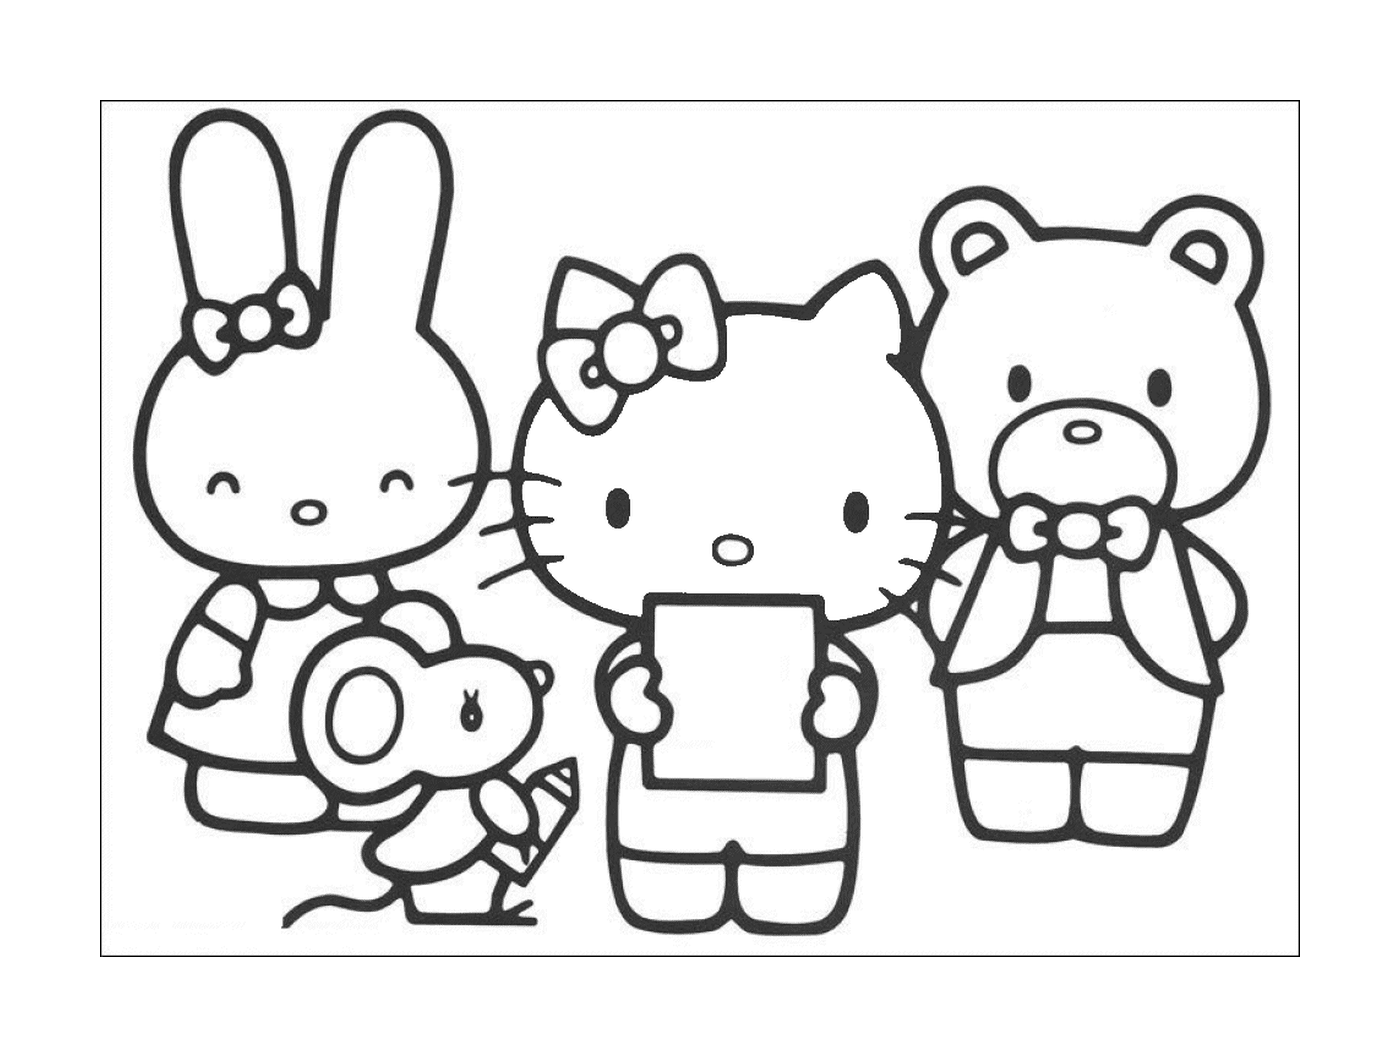  A group of friends Hello Kitty 